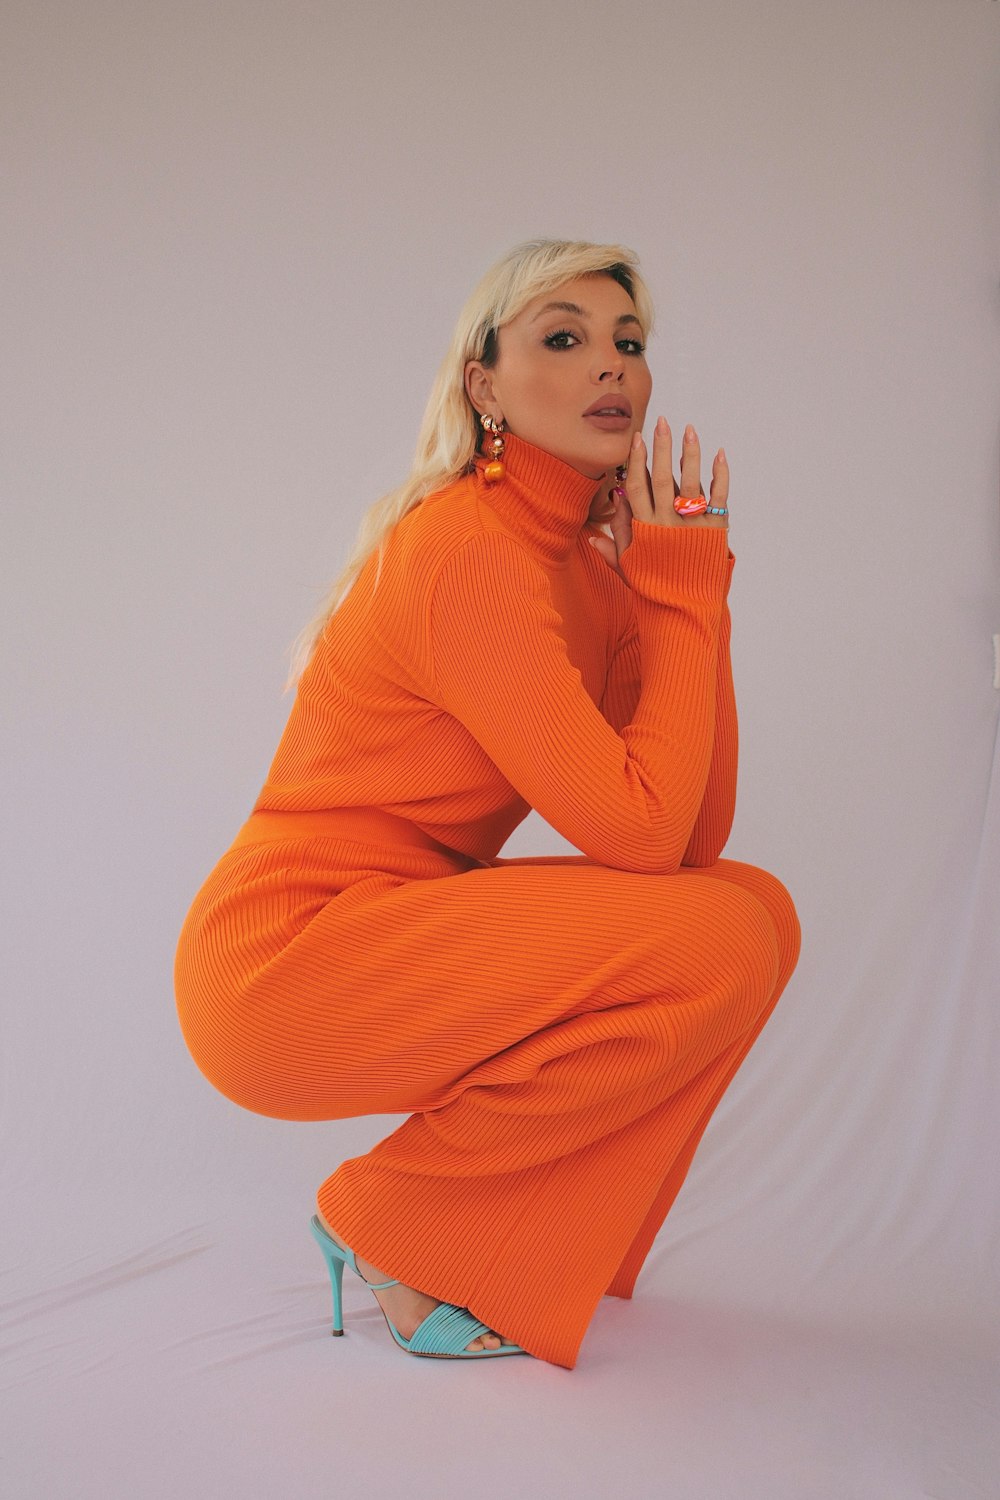 woman in orange sweater and brown pants sitting on white floor